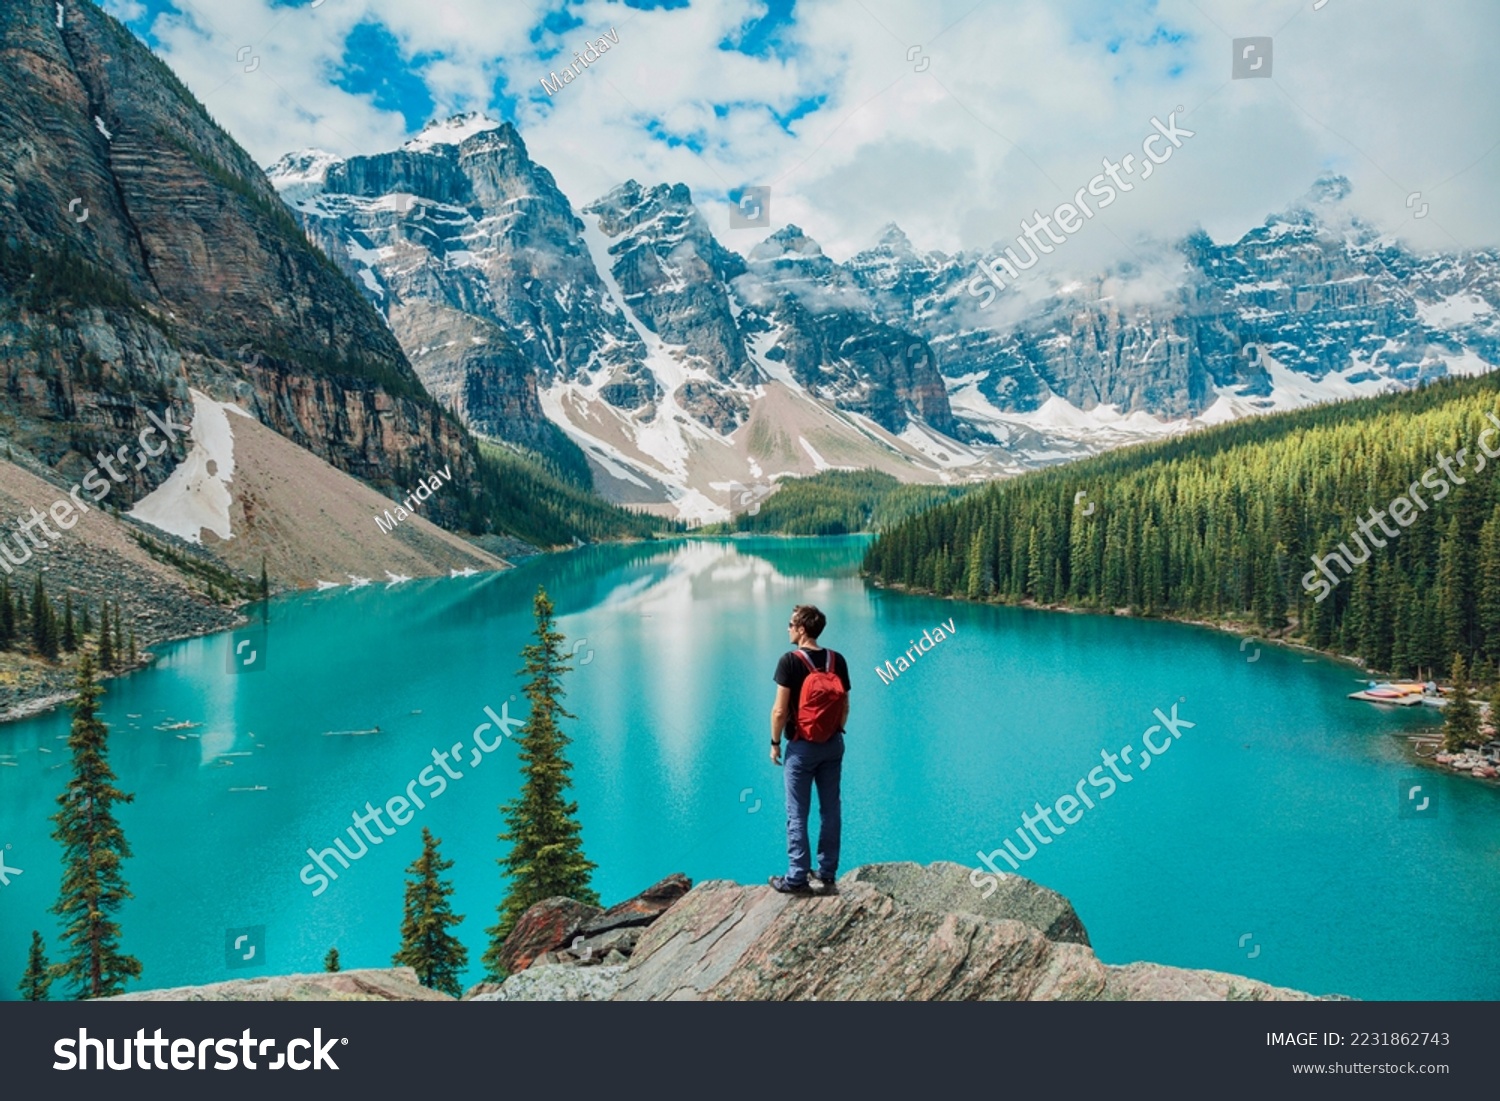 Canada travel man hiker at Moraine Lake Banff National Park, Alberta. Canadian rockies landscape people hiking with backpack lifestyle #2231862743